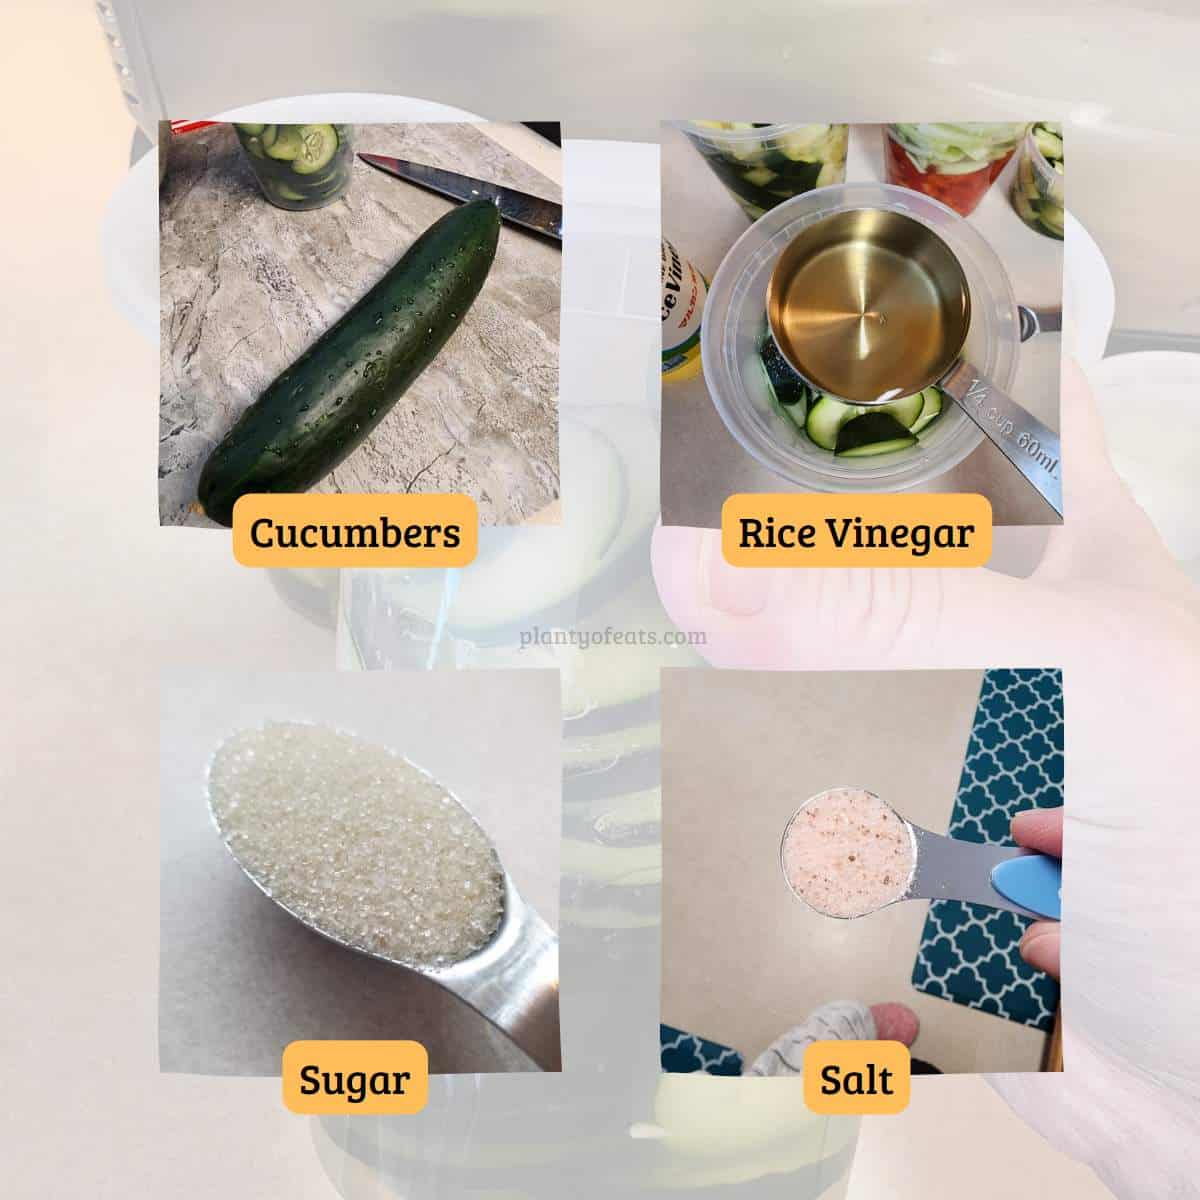 ingredients for pickled cucumbers, with text labels.